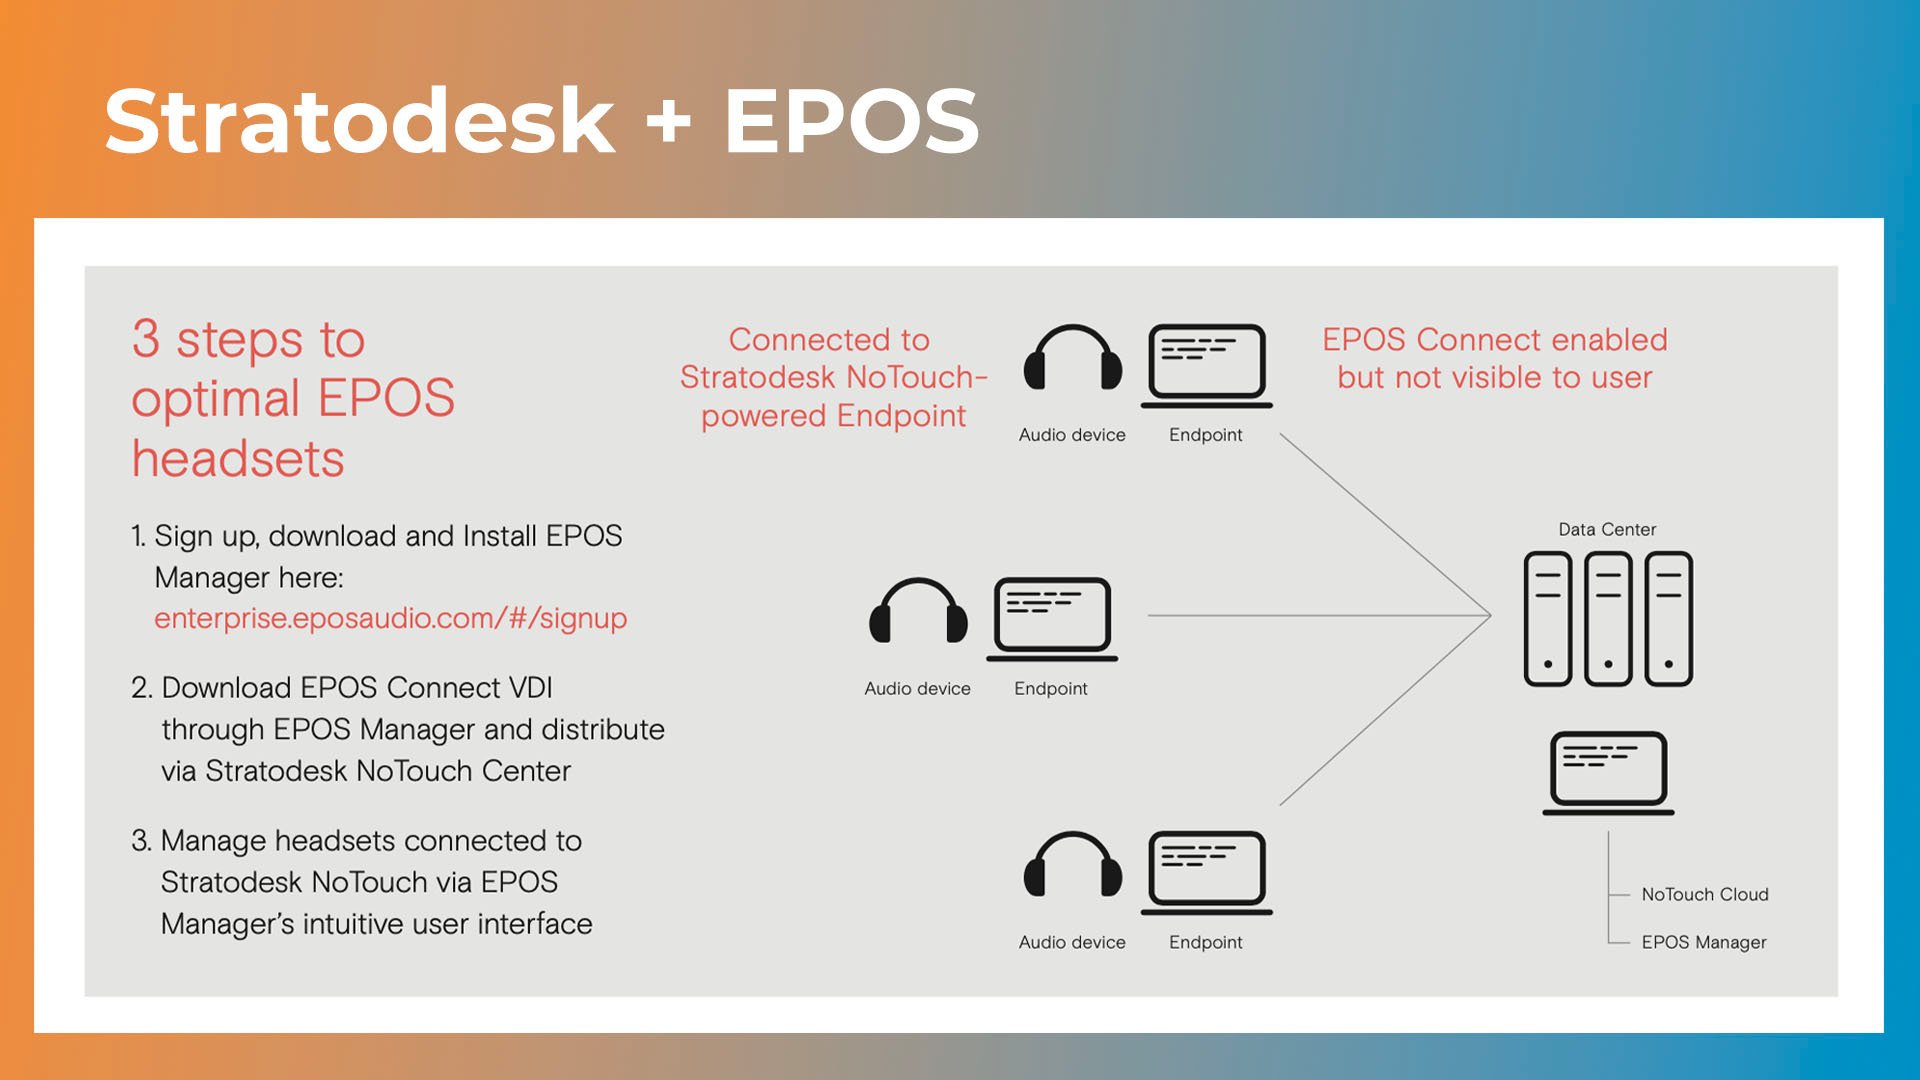 Stratodesk NoTouch Now Supports EPOS Manager for the Management of EPOS Audio Devices